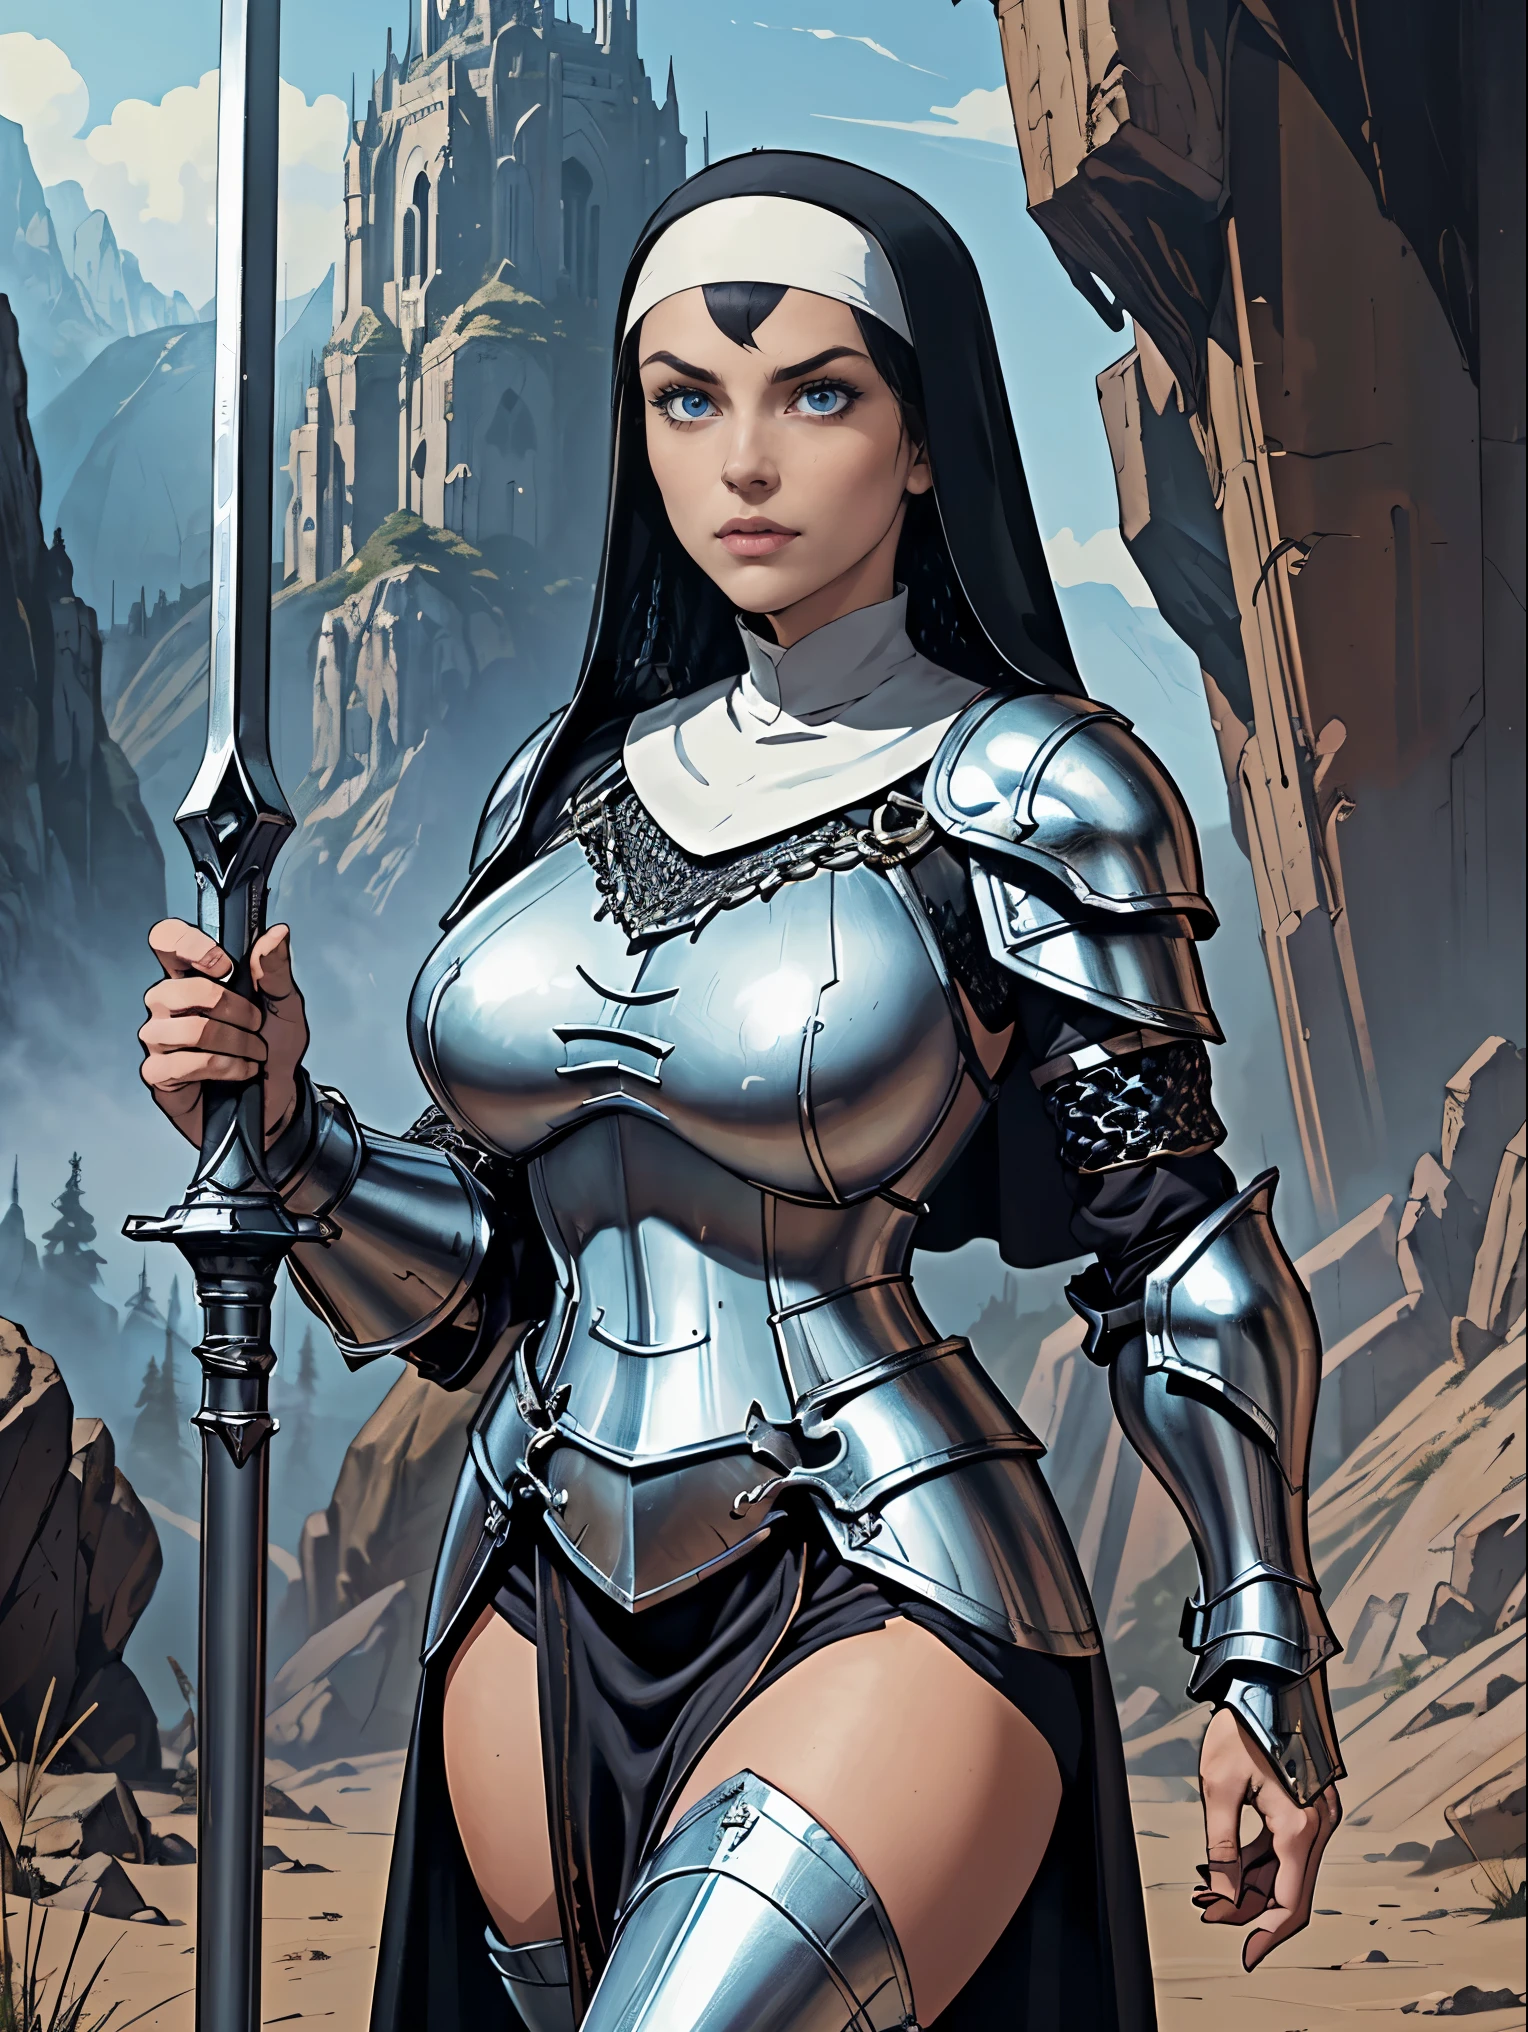 (masterpiece, top quality, best quality, official art, beautiful and aesthetic:1.2), (1girl:1.3), ((Sharp facial features, sharp features, hawkish features)), ((blue eyes)), busty brunette paladin knight girl, extremely detailed, portrait, looking at viewer, solo, (full body:0.6), detailed background, full-body shot, (warm mountain meadow theme:1.1), holy knight, (nun), charlatan, smirk, mysterious, swaying in mountains, armor, polished metal, gold trim, long boots, white fabric, pelvic curtain, robe, pale leather, ((((nun, corona, holy aura, mace, heavy armor, armored, long legs, pelvic curtain, toned, muscular, chainmail)))), slim waist, slim hips, long legs, medieval (mountain exterior:1.1) background, dark mysterious lighting, shadows, magical atmosphere, dutch angle